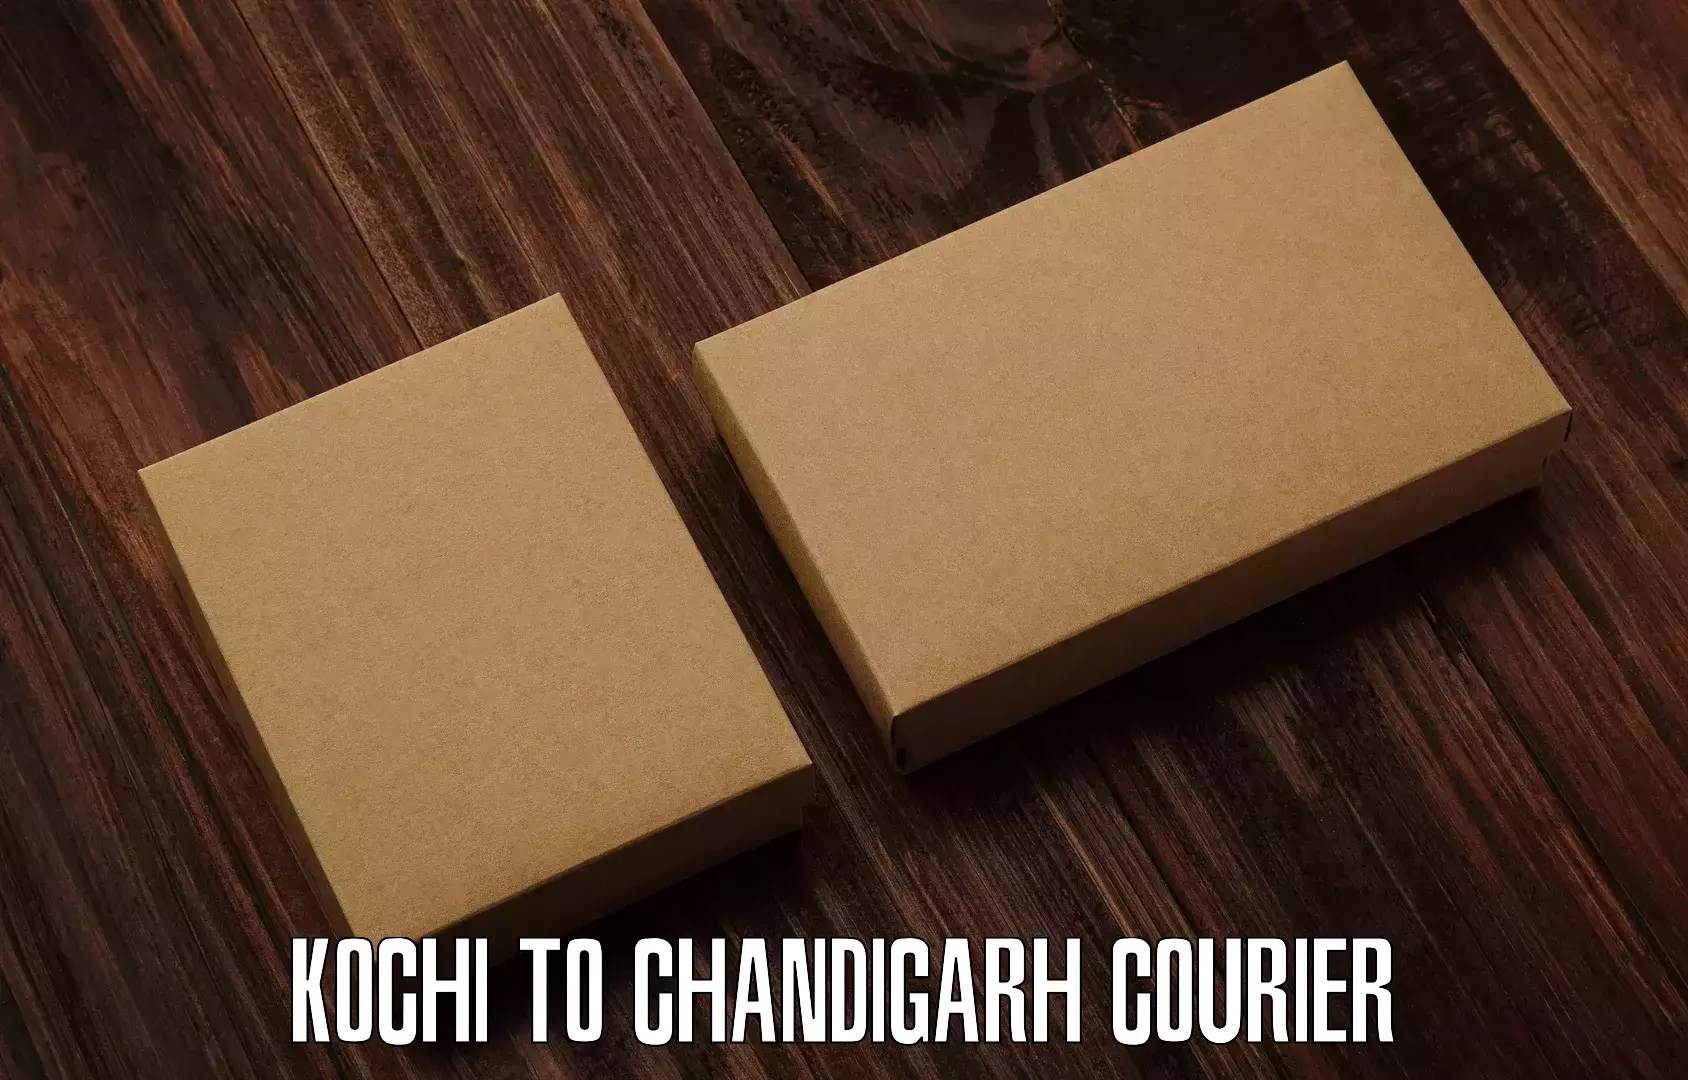 Express package services Kochi to Chandigarh